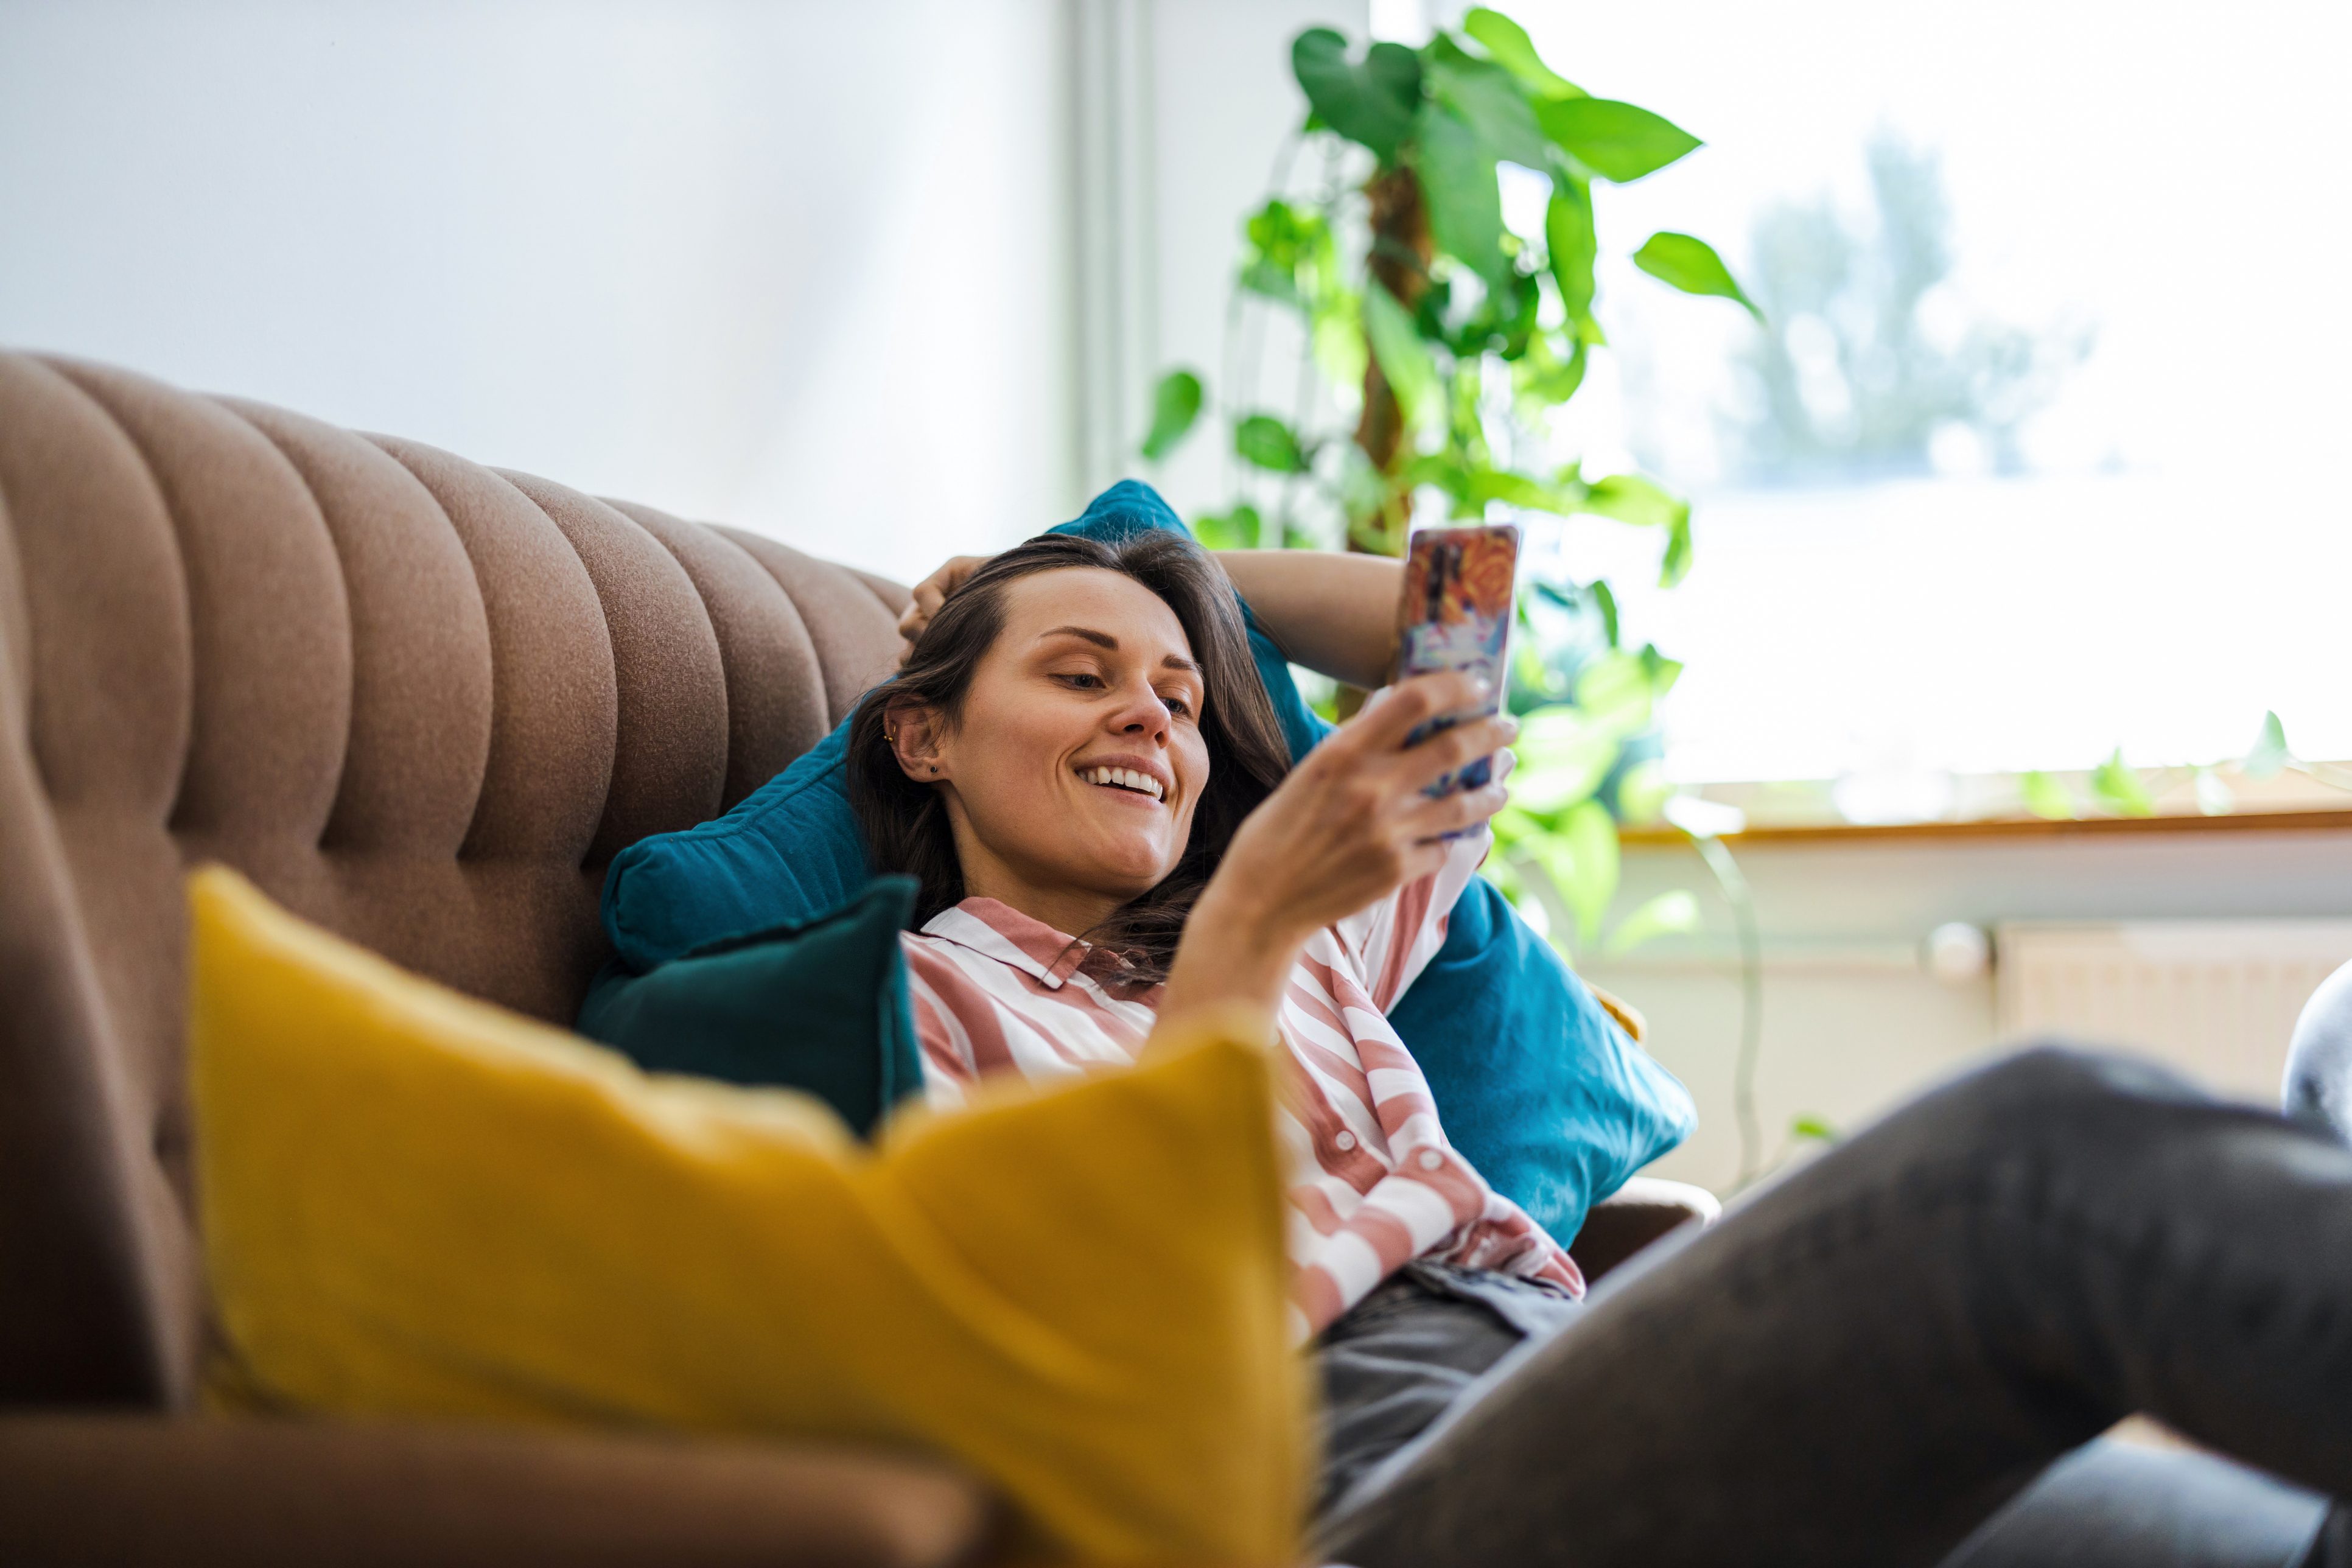 Lady slouched on sofa with legs up, smiling at the phone in her hand